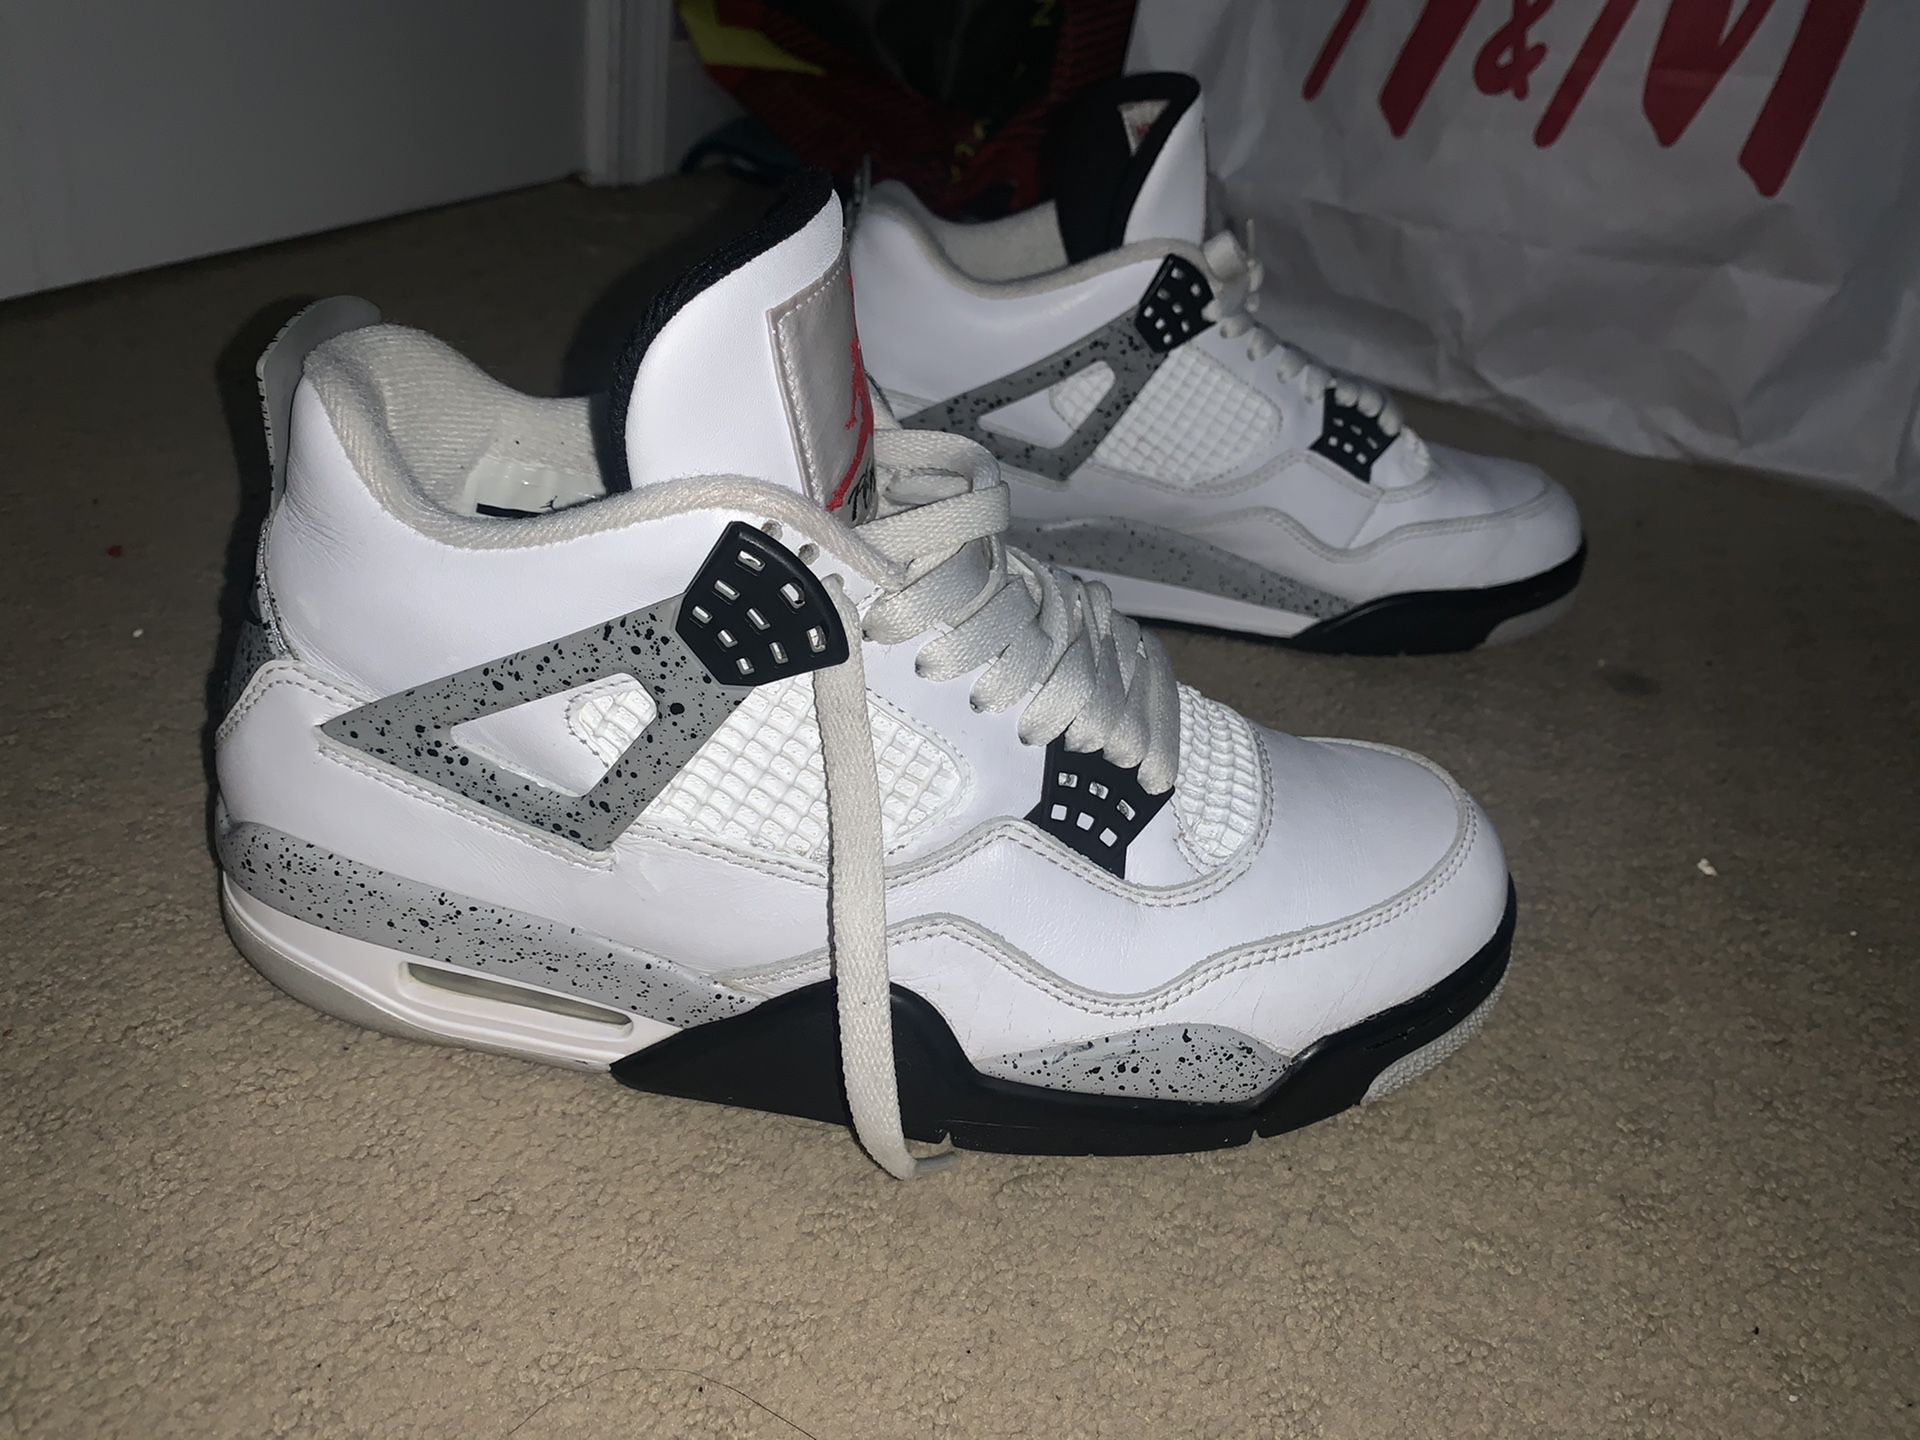 Jordan 4 White Cement (2016) With Nike Air Size 8